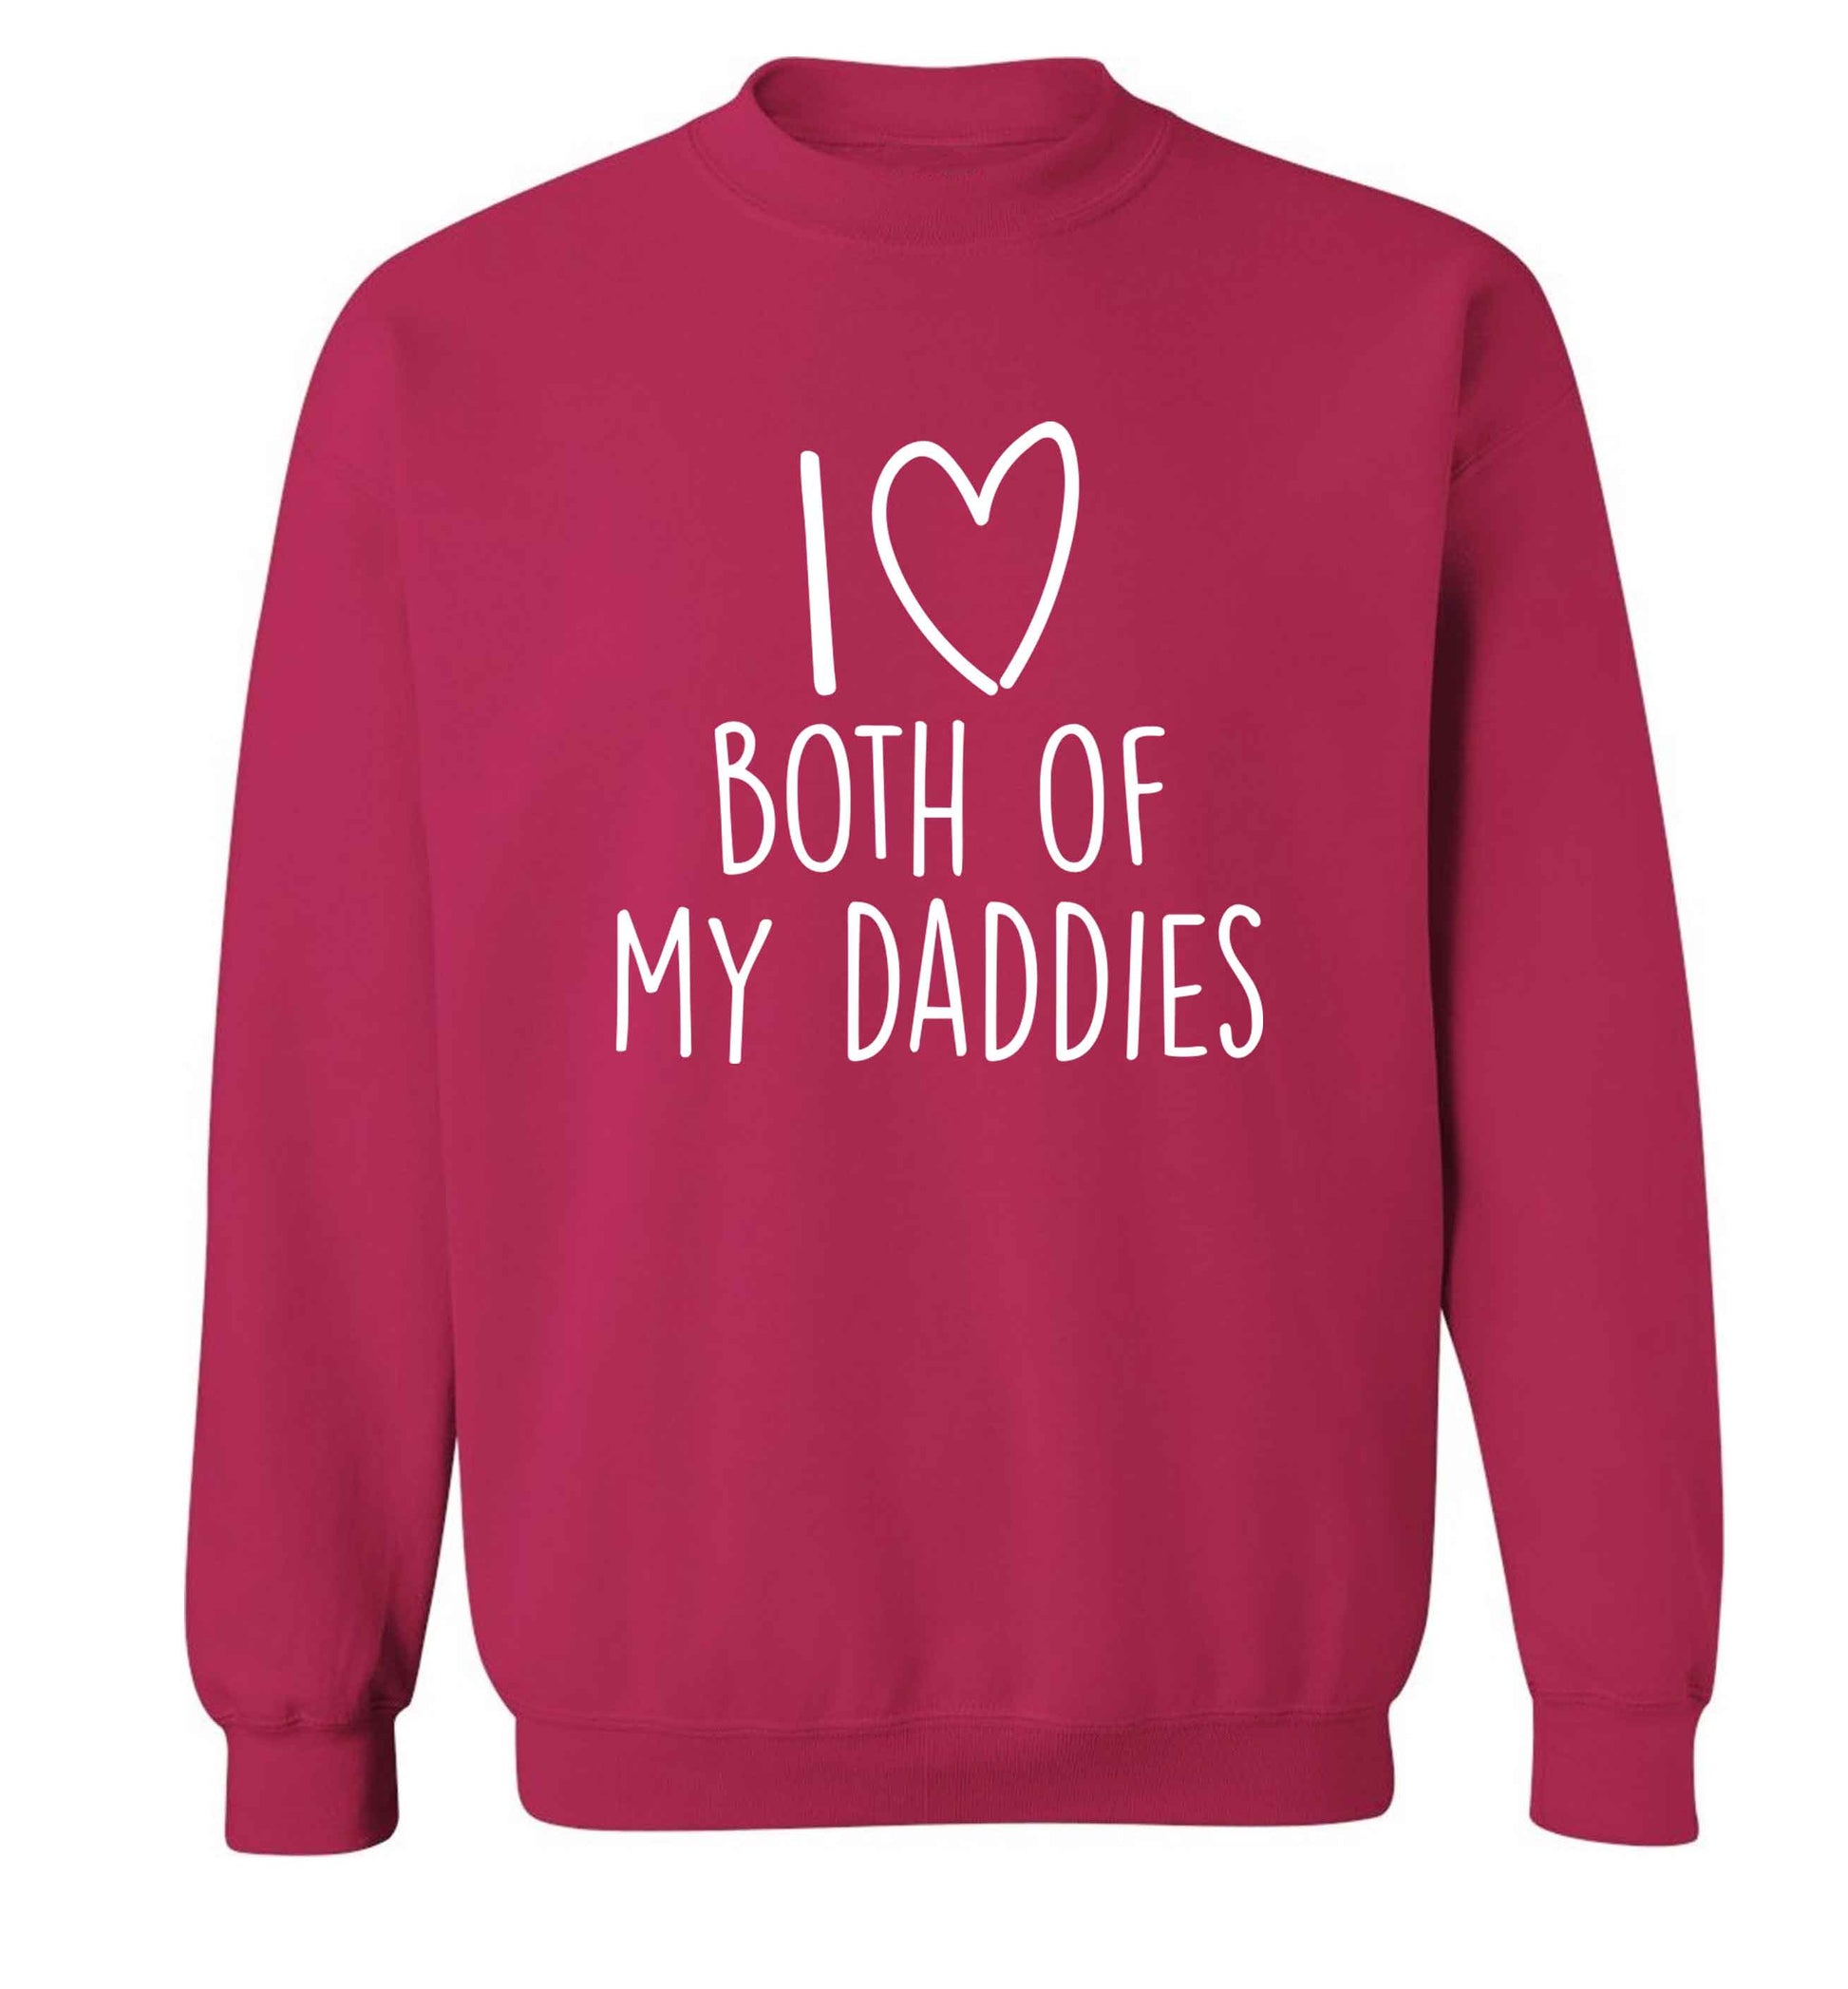 I love both of my daddies adult's unisex pink sweater 2XL